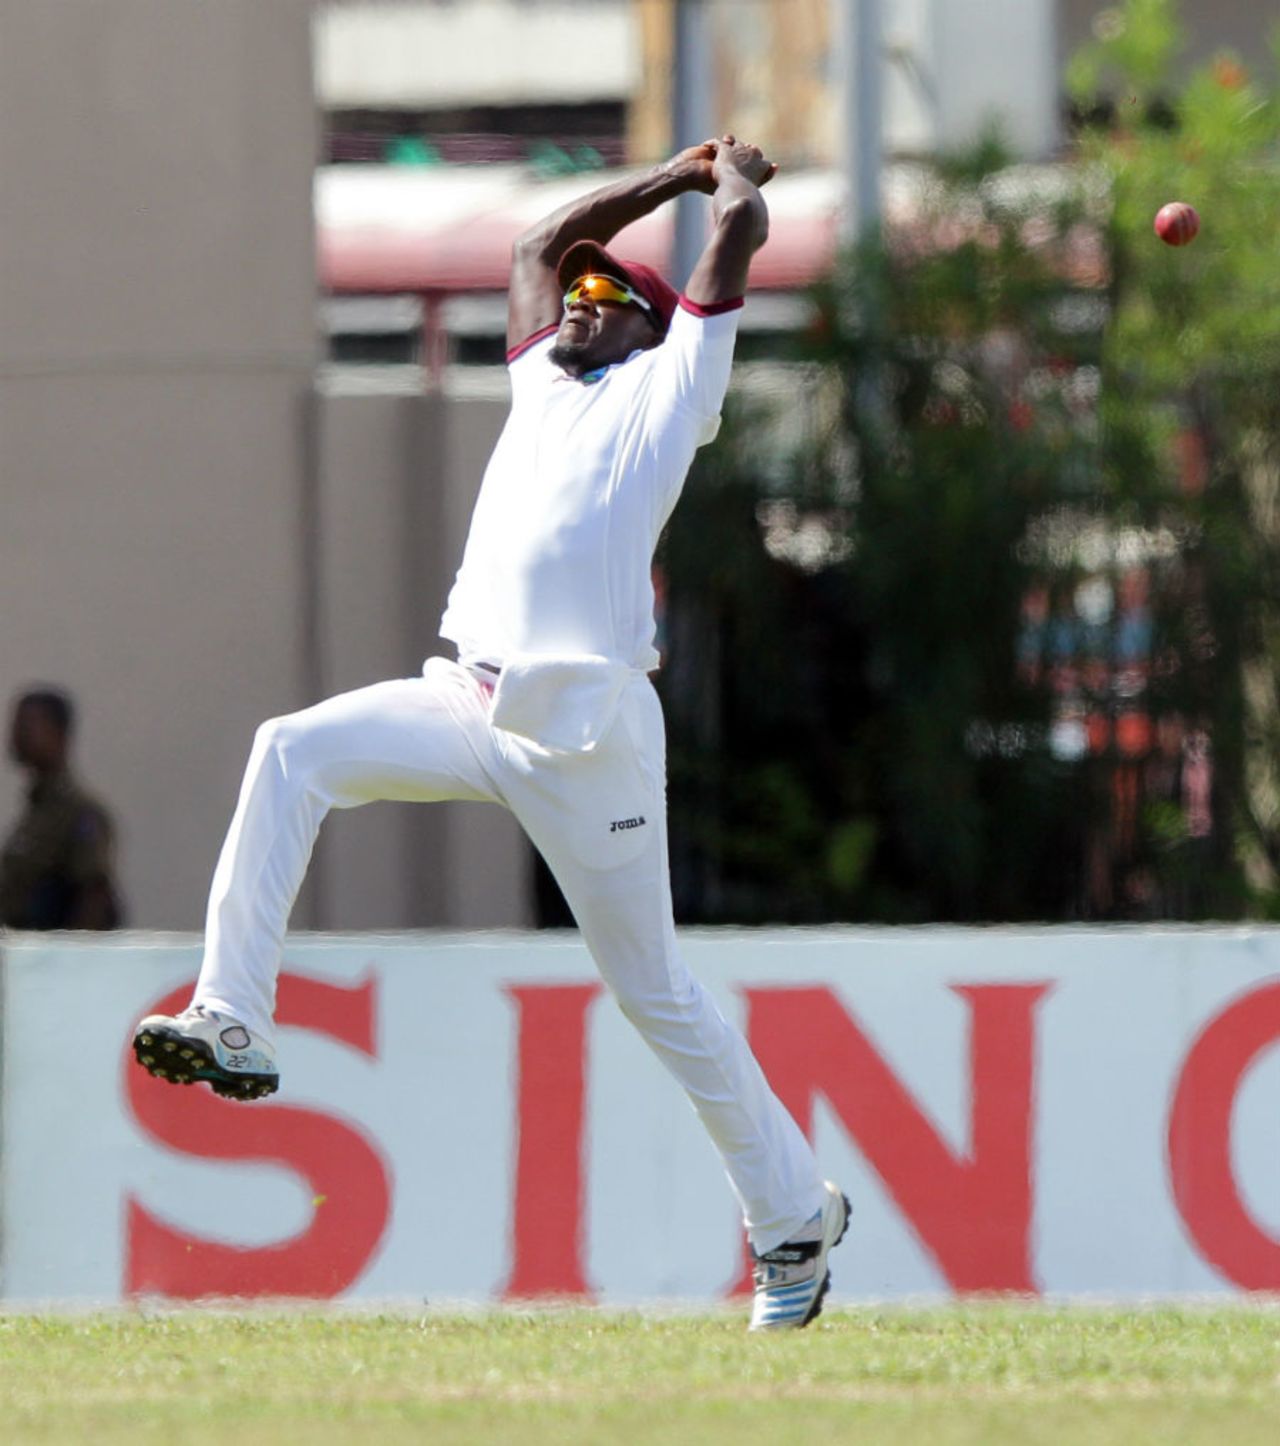 Jerome Taylor fails to hold on to a catch, Sri Lanka v West Indies, 1st Test, Galle, 1st day, October 14, 2015